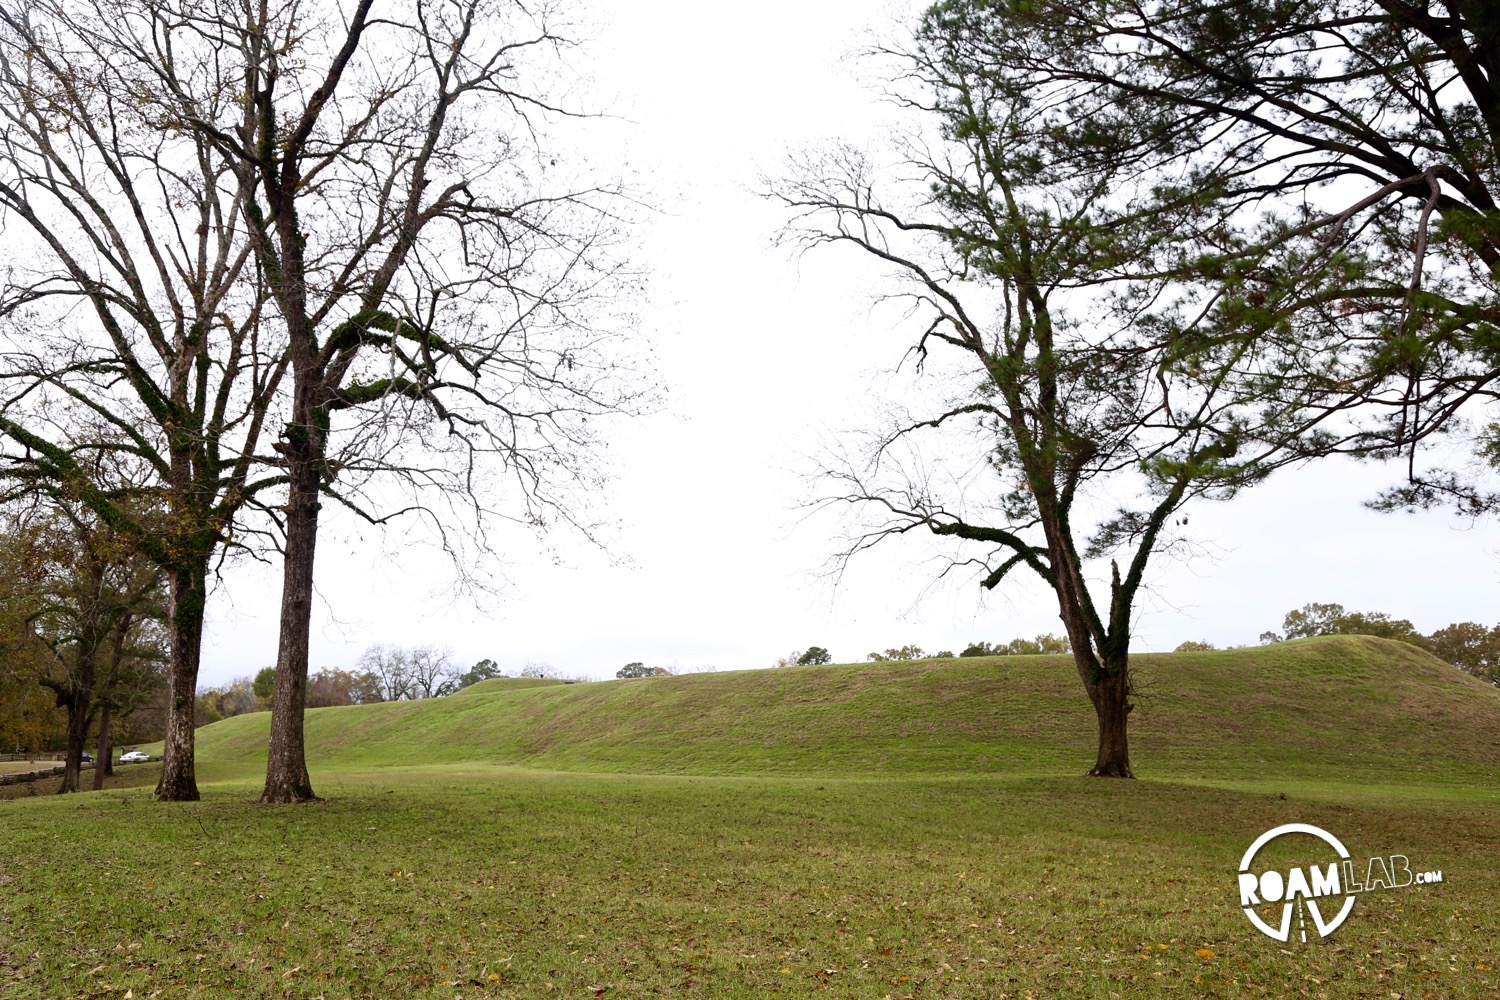 Many mounds dot the Natchez Trace, constructed by ancient stone age tribes. But none compare the the sheer size of the Emerald Mound.